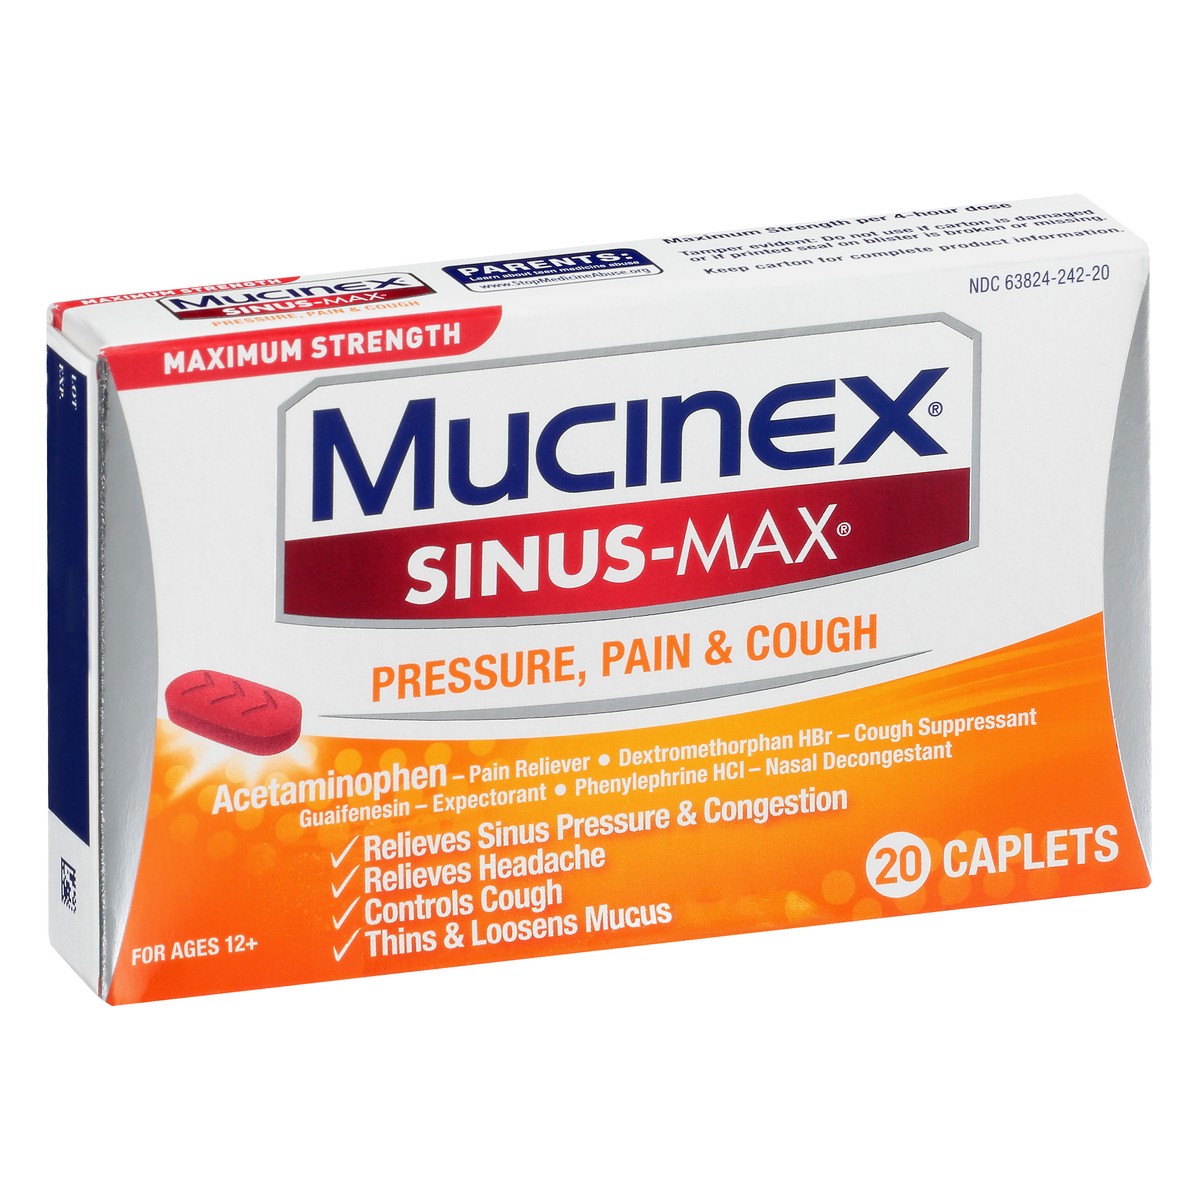 slide 2 of 9, Mucinex Sinus-Max Pressure Pain & Cough Relief Tablets, 20 count, 1 ct